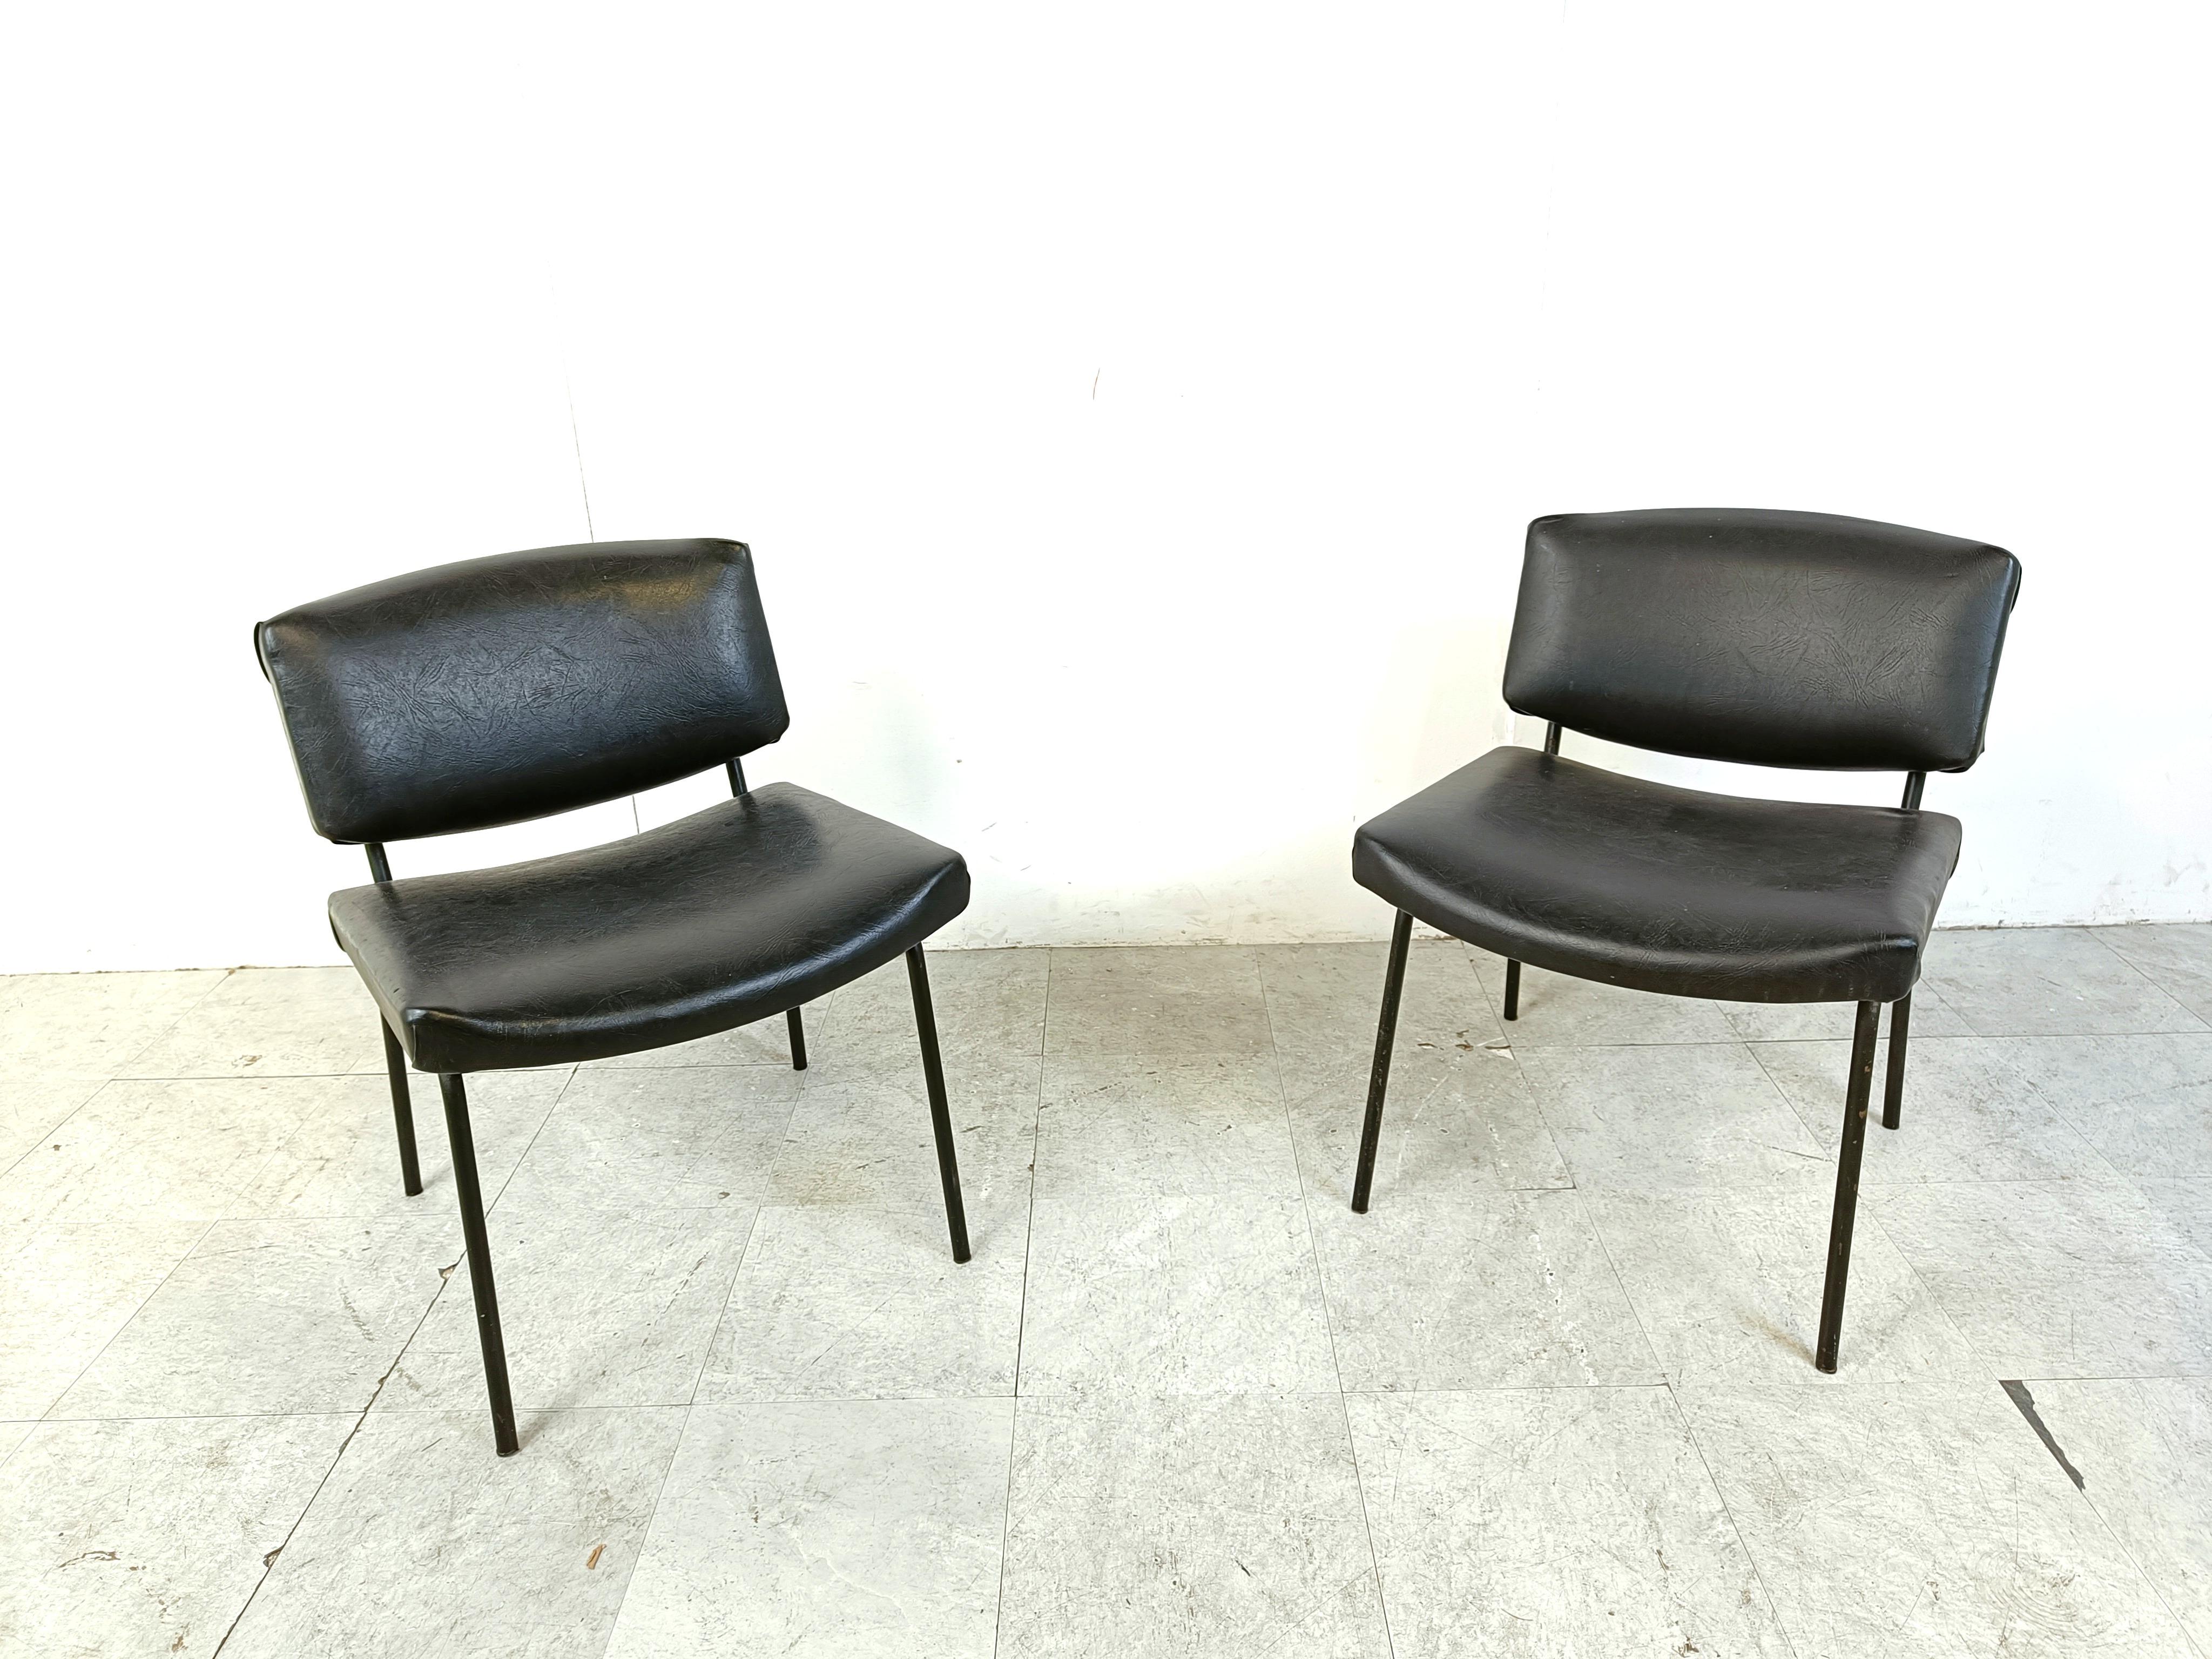 Set of 2 mid century modern 'conseil' chairs designed by Pierre Guariche for Meurop.

The chairs have a black lacquered frame and are upholstered in their original black leatherette or skai. 

The chairs are in good condition

Dimensions:
Height: 71